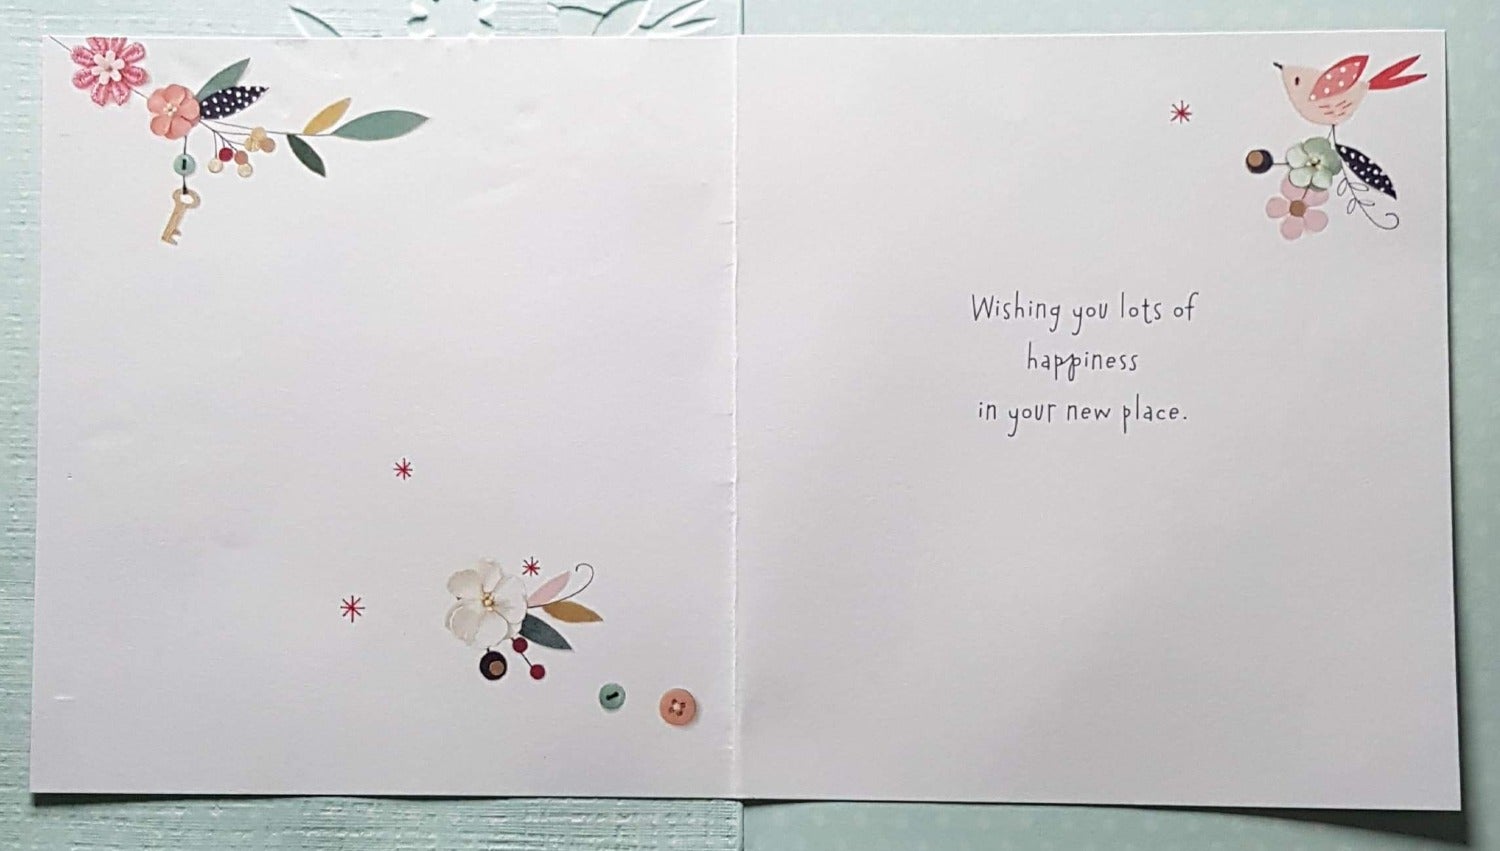 Congratulations Card - New Home / 'You've Moved' & A Fenced Roof House